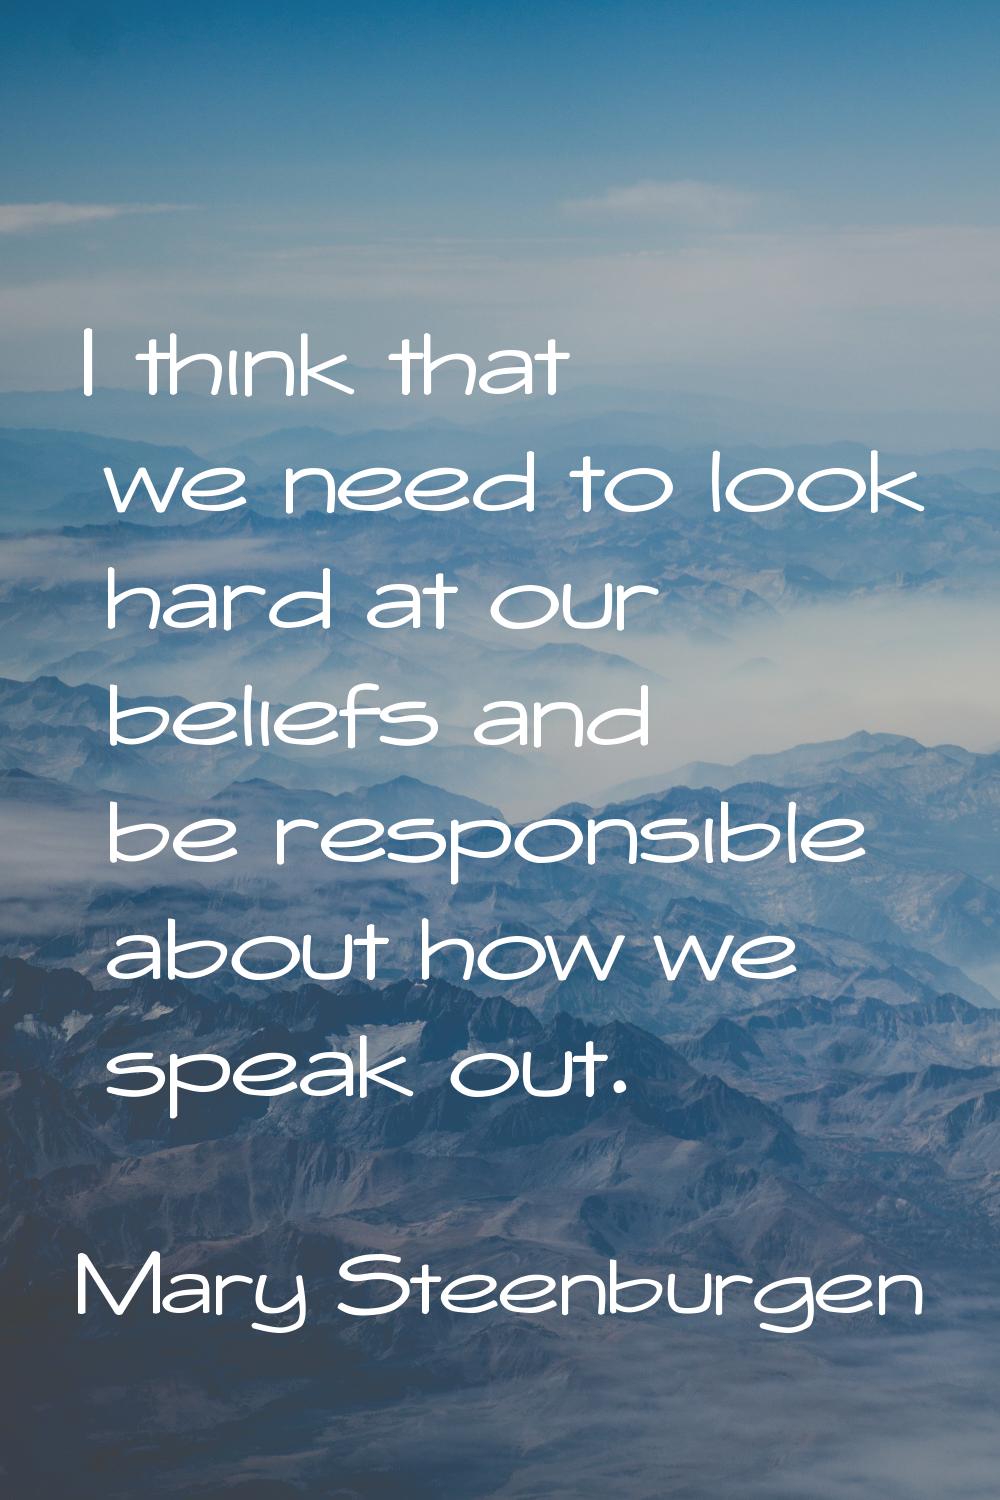 I think that we need to look hard at our beliefs and be responsible about how we speak out.